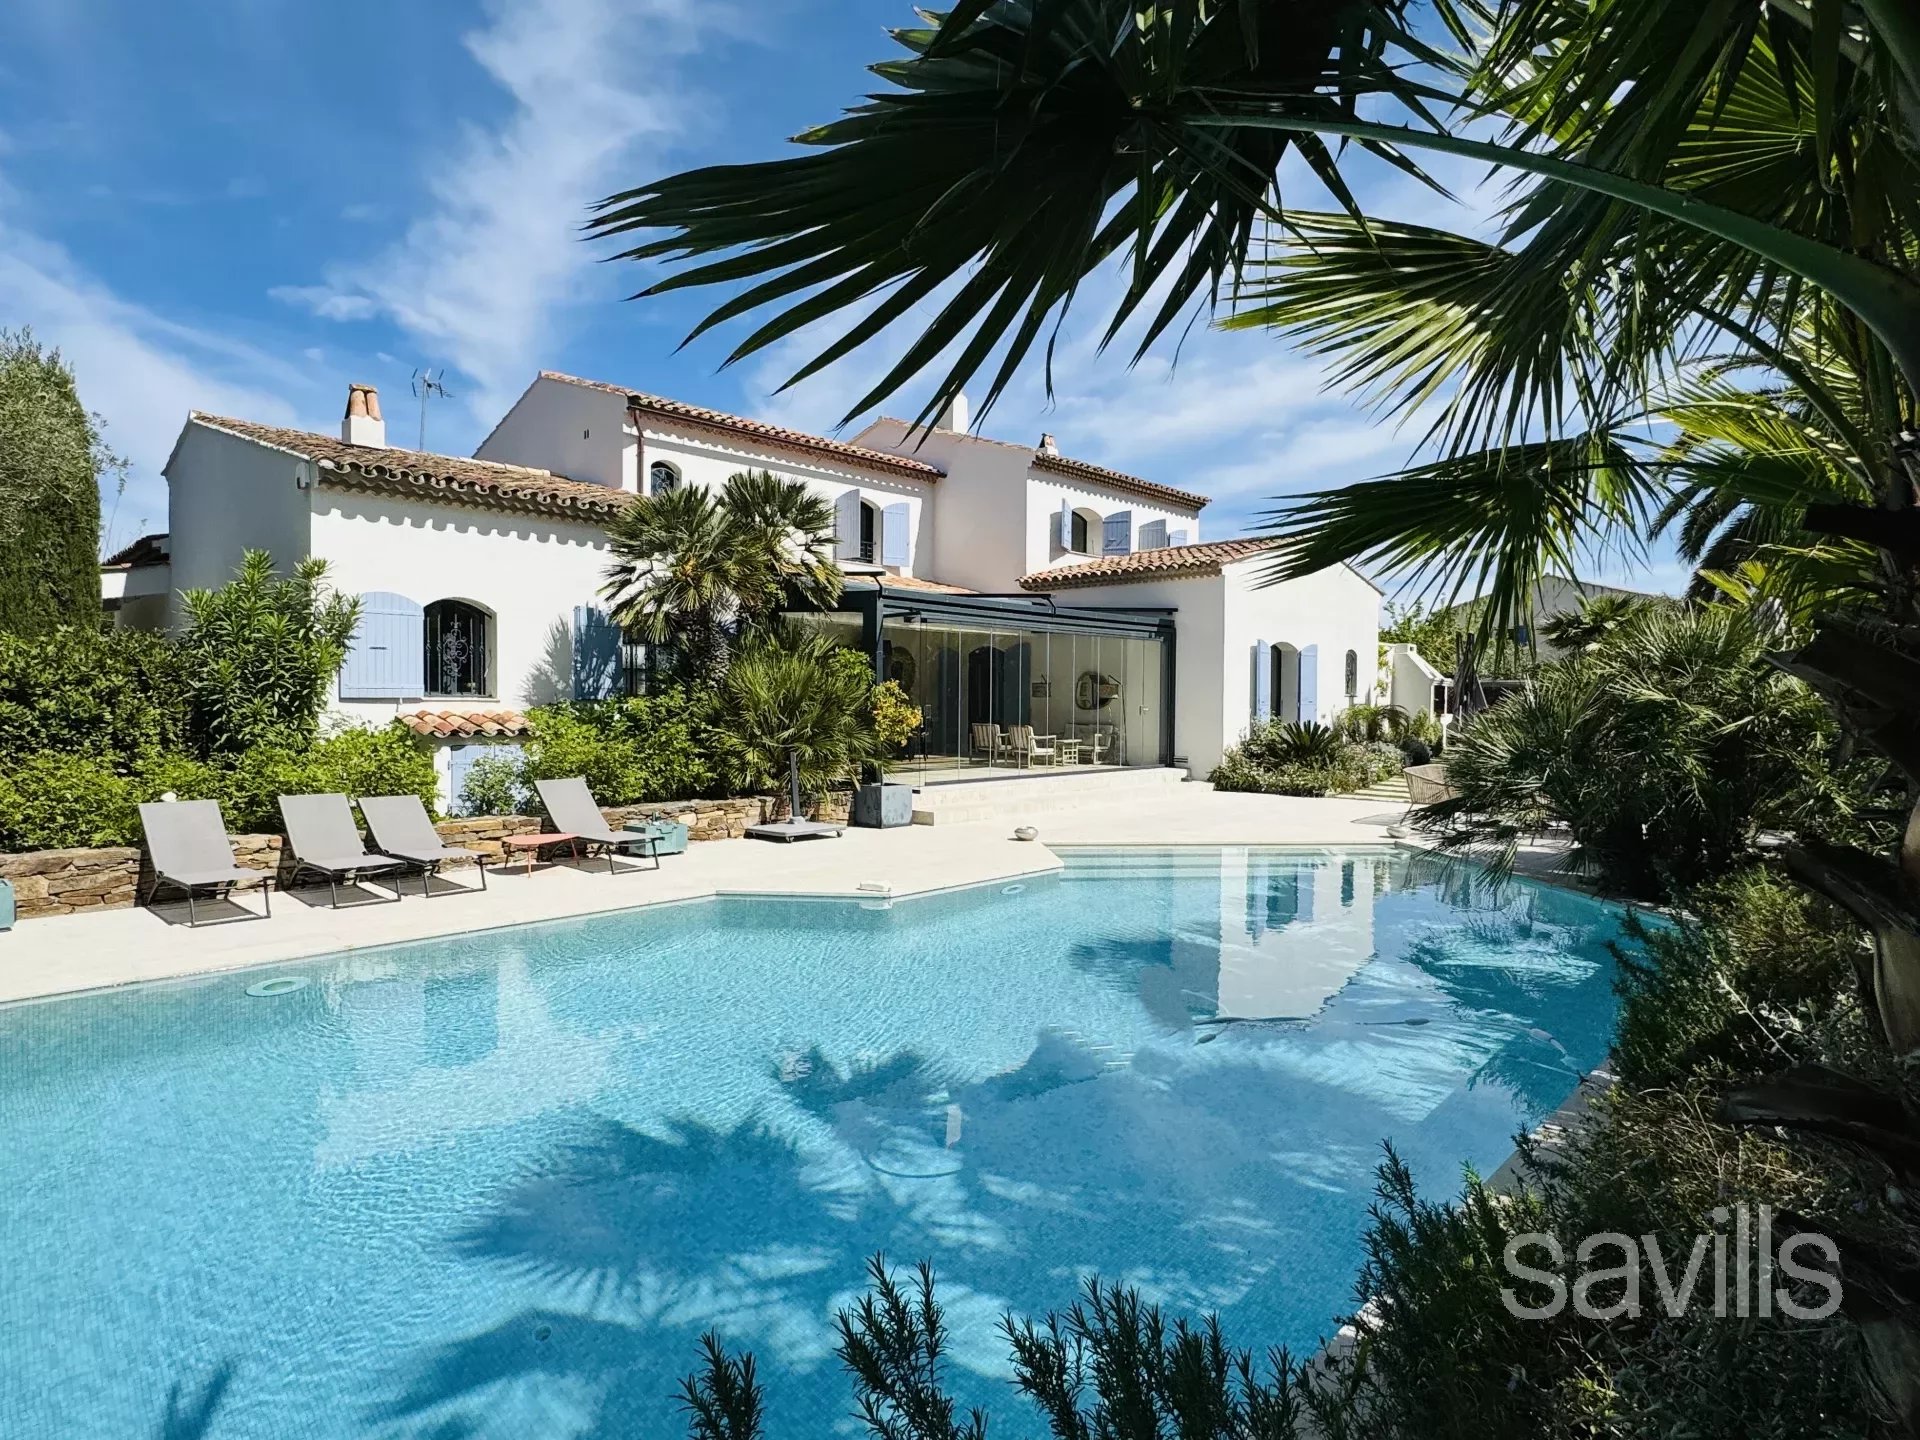 Idealy located in Saint-Tropez, in a peaceful area within walking distance to the village